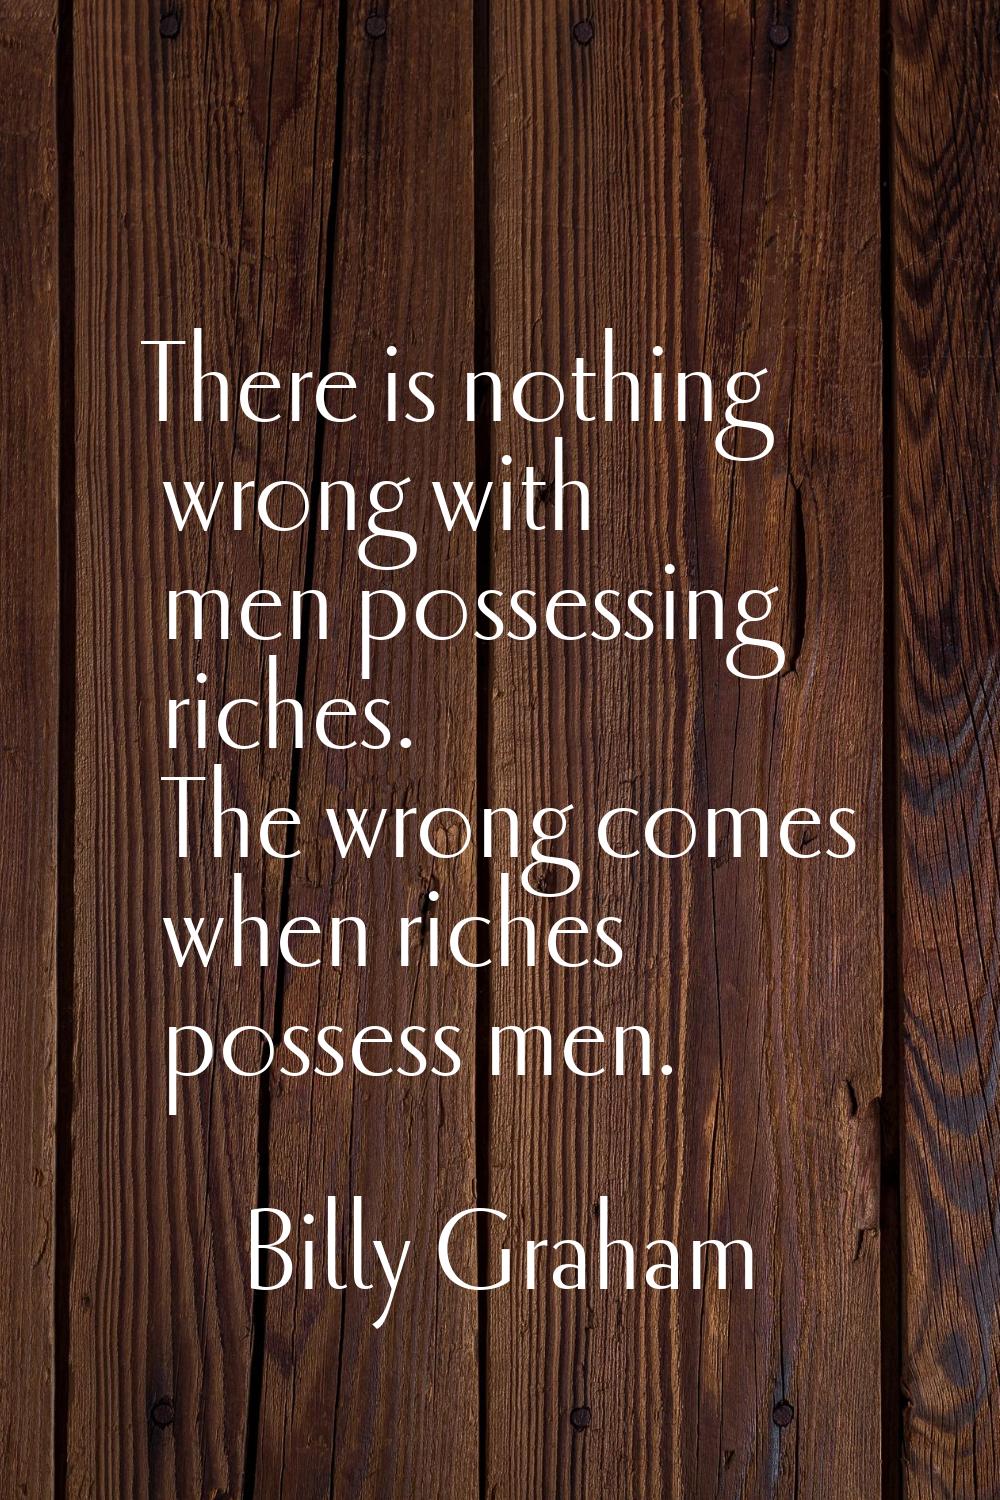 There is nothing wrong with men possessing riches. The wrong comes when riches possess men.